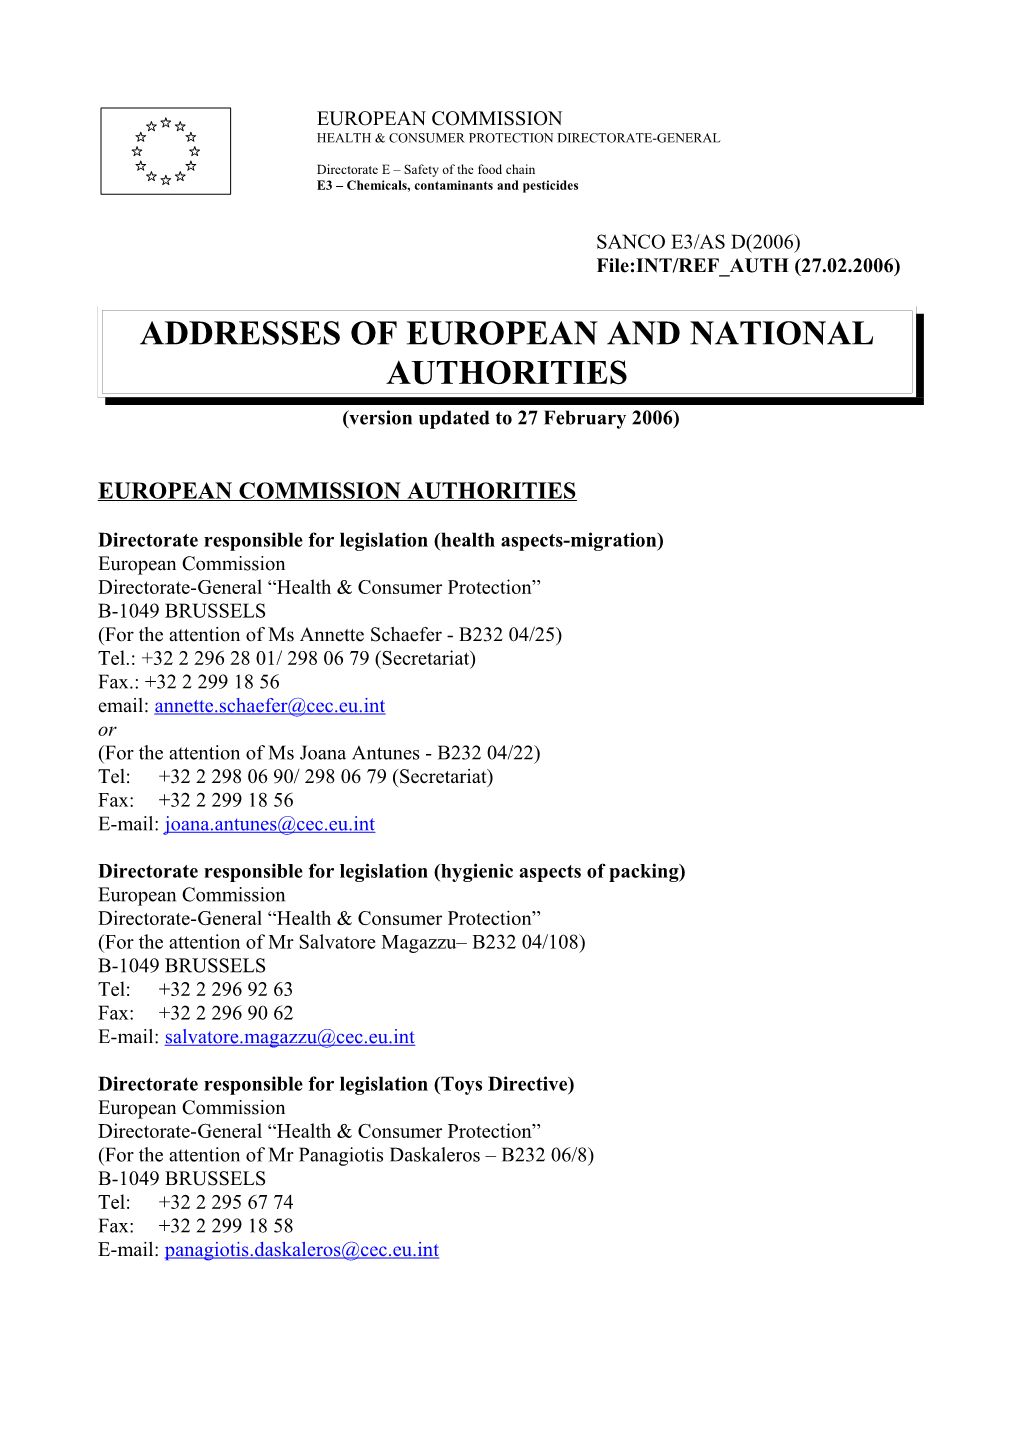 Addresses of European and National Authorities